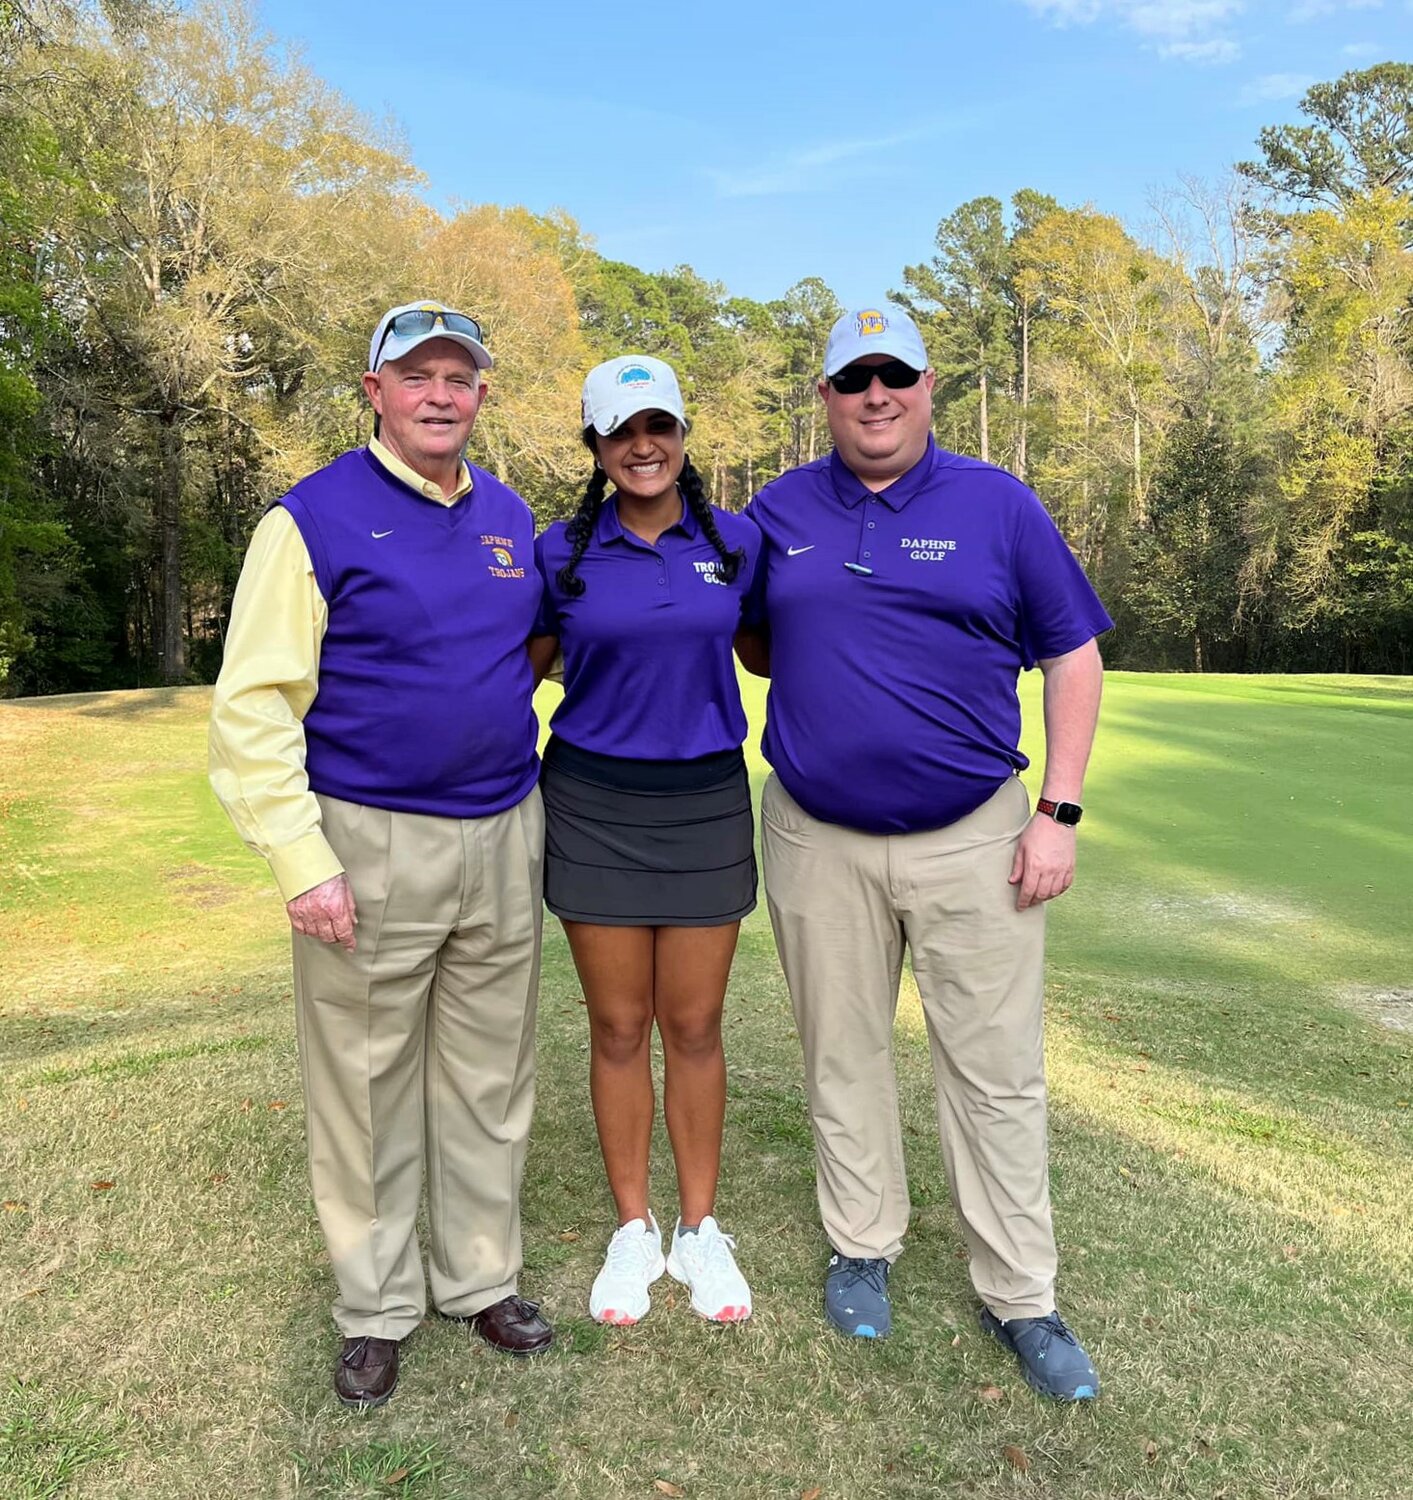 Daphne rising senior Samiya Bodalia poses for a picture with coaches Robert Guthrie and Dannie Mixon during a tournament in March. Bodalia will represent the Trojans this summer at the AHSAA North-South All-Star girls’ golf competition in Montgomery.